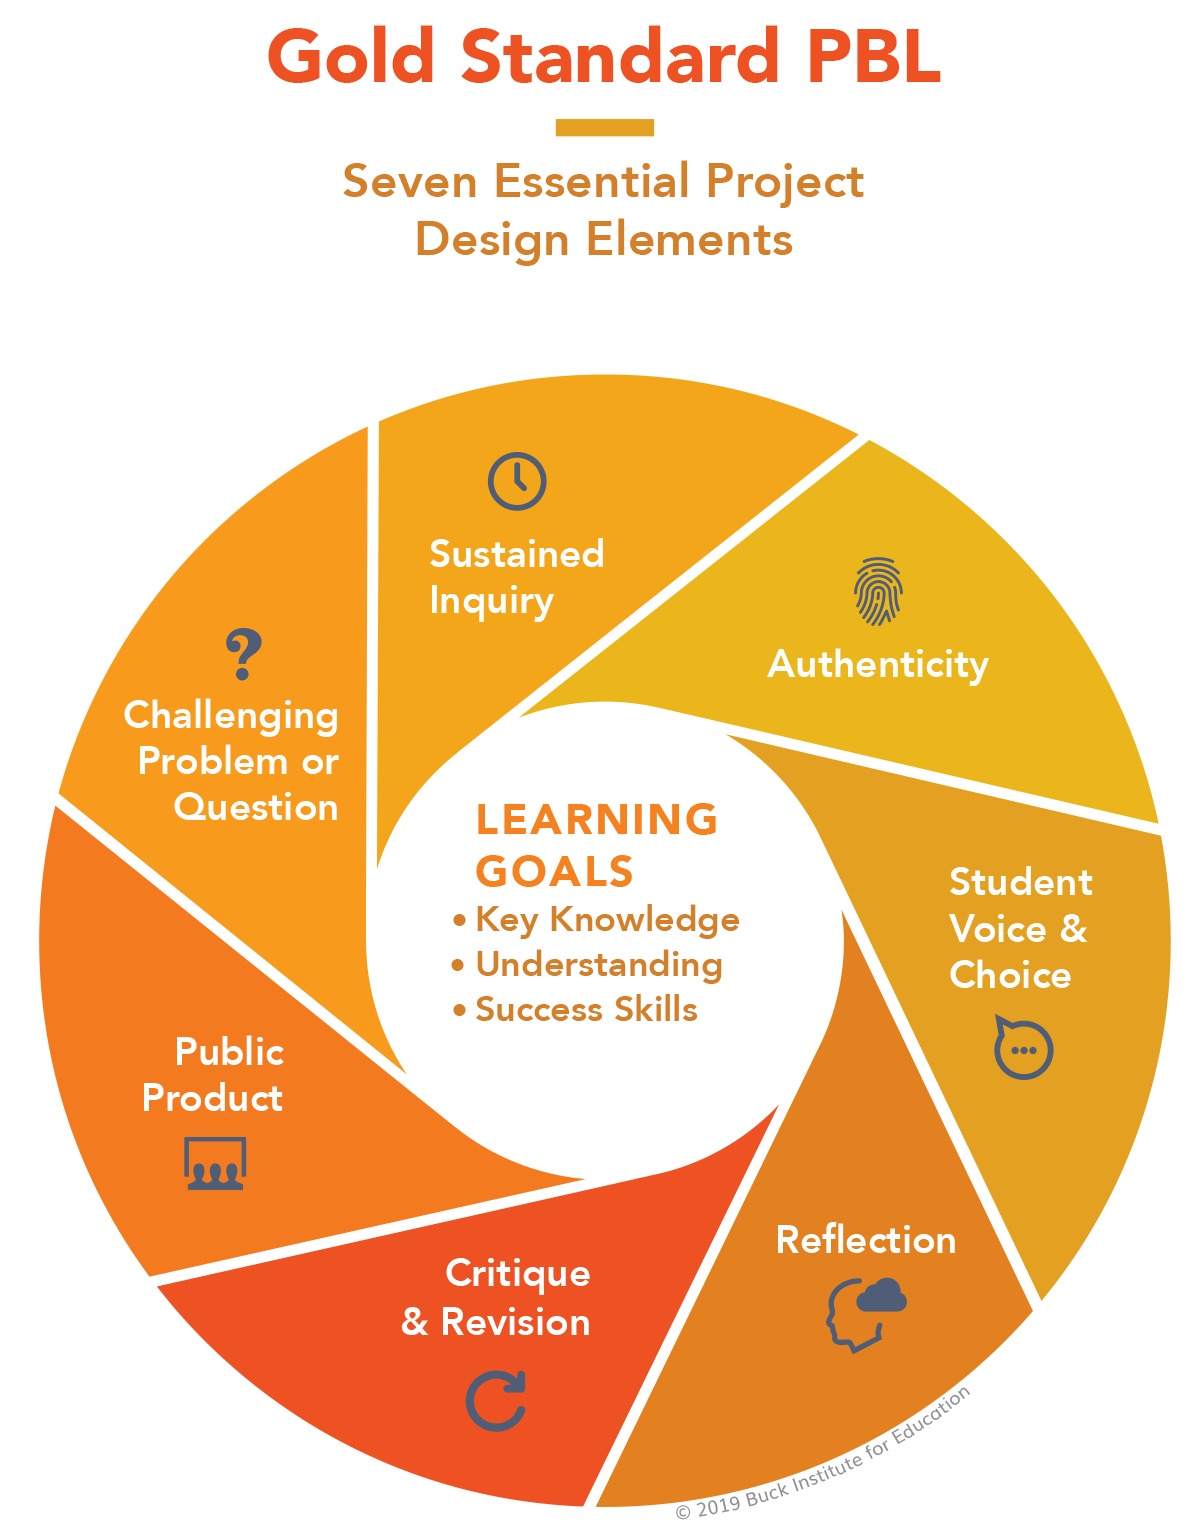 The Buck Institute for Education lists their seven Gold Standards for successful PBL in the form of a wheel.